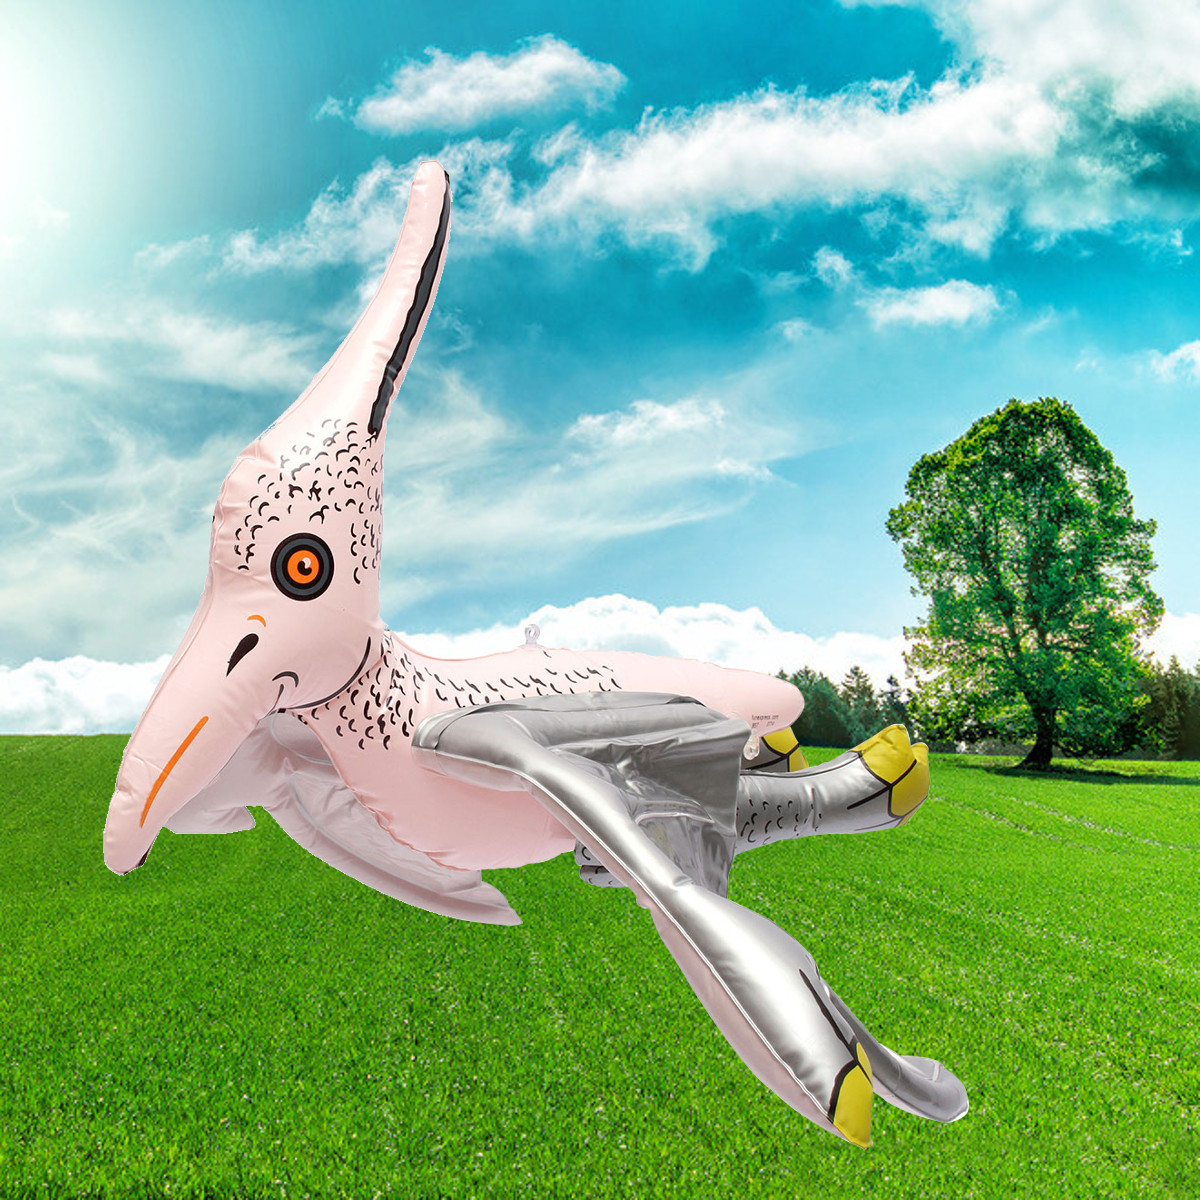 Pterosaur-Dinosaur-Inflatable-Blow-Up-Toy-Children-Party-Gift-Decor-1107734